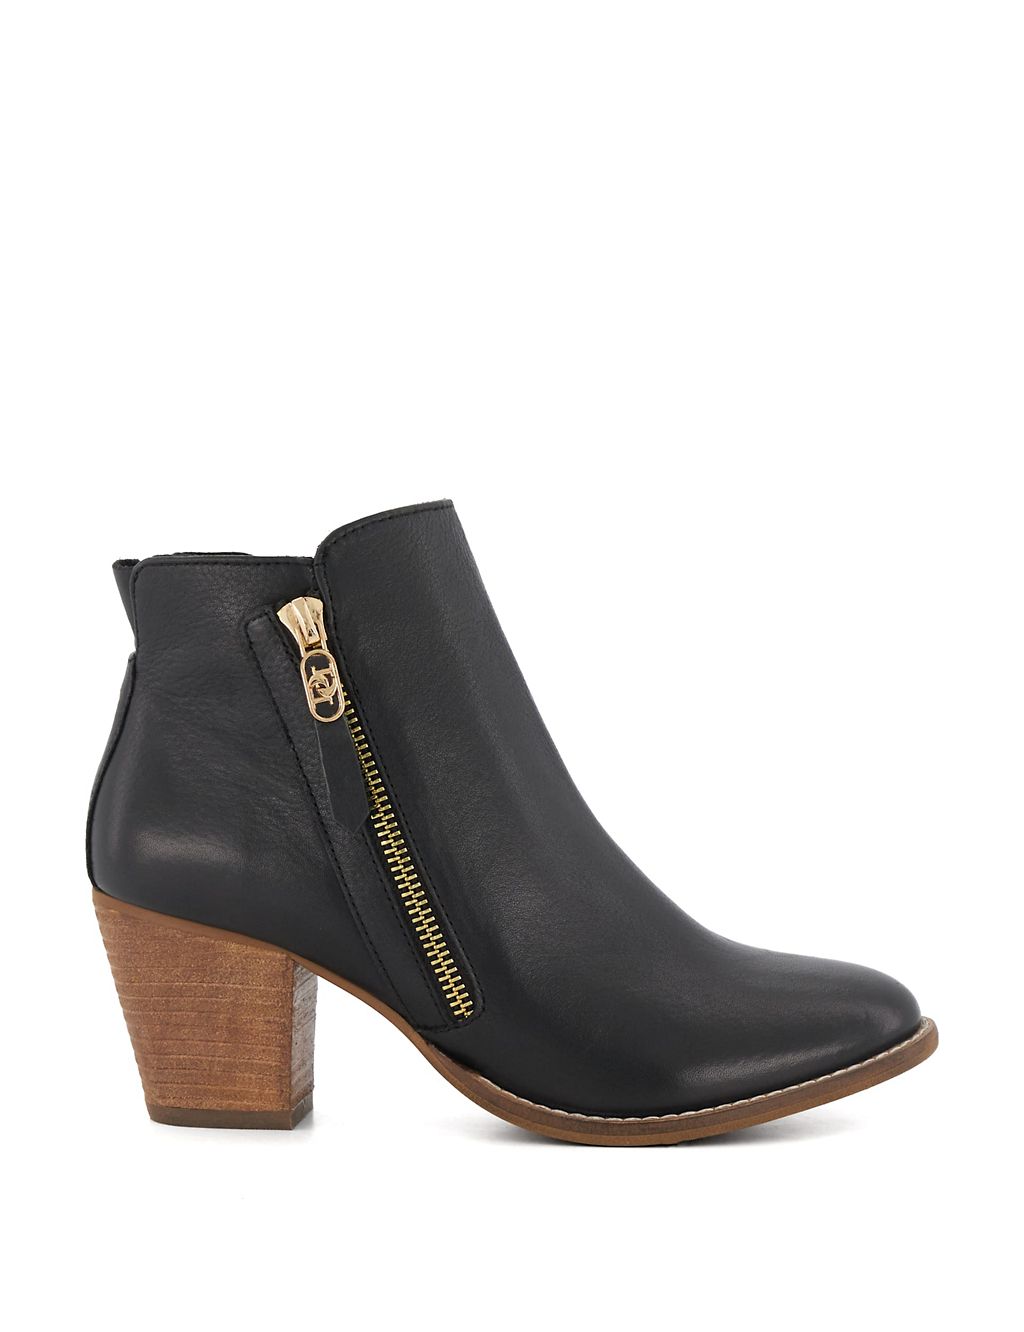 Suede Block Heel Round Toe Ankle Boots 3 of 4